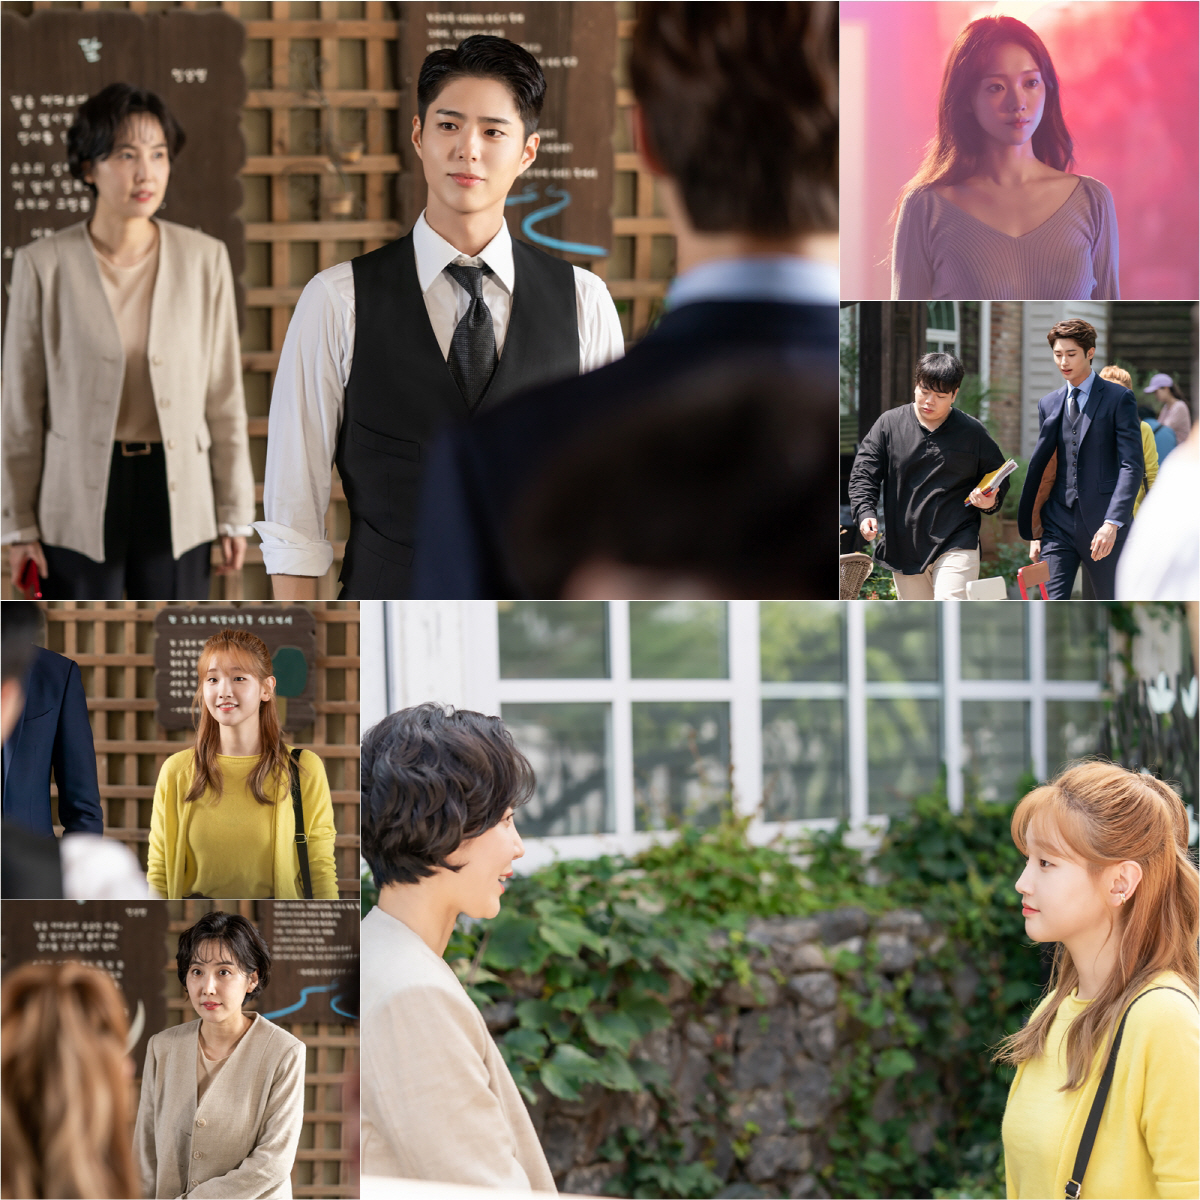 The hottest moves of Record of Youth Park Bo-gum continueTVN Mon-Tue drama Record of Youth (director Ahn Gil-ho, playwright Ha Myung-hee, production fan entertainment, studio dragon) released the scene of the tenth day of Sa Hye-joon (Park Bo-gum), who is solid even in Danger.Park So-dam, who shares a heartbeat eye contact with people from the eyes of the drama The First Human, and Won Hae-hyo (Byeon Woo-suk), who is busy, are also caught together and raise questions.Here, Lee Sung-kyung, who is a colleague of Sa Hye-joons model and a special appearance as the heroine of the new work, Jin Seo-woo, is added to raise expectations.In the meantime, Sa Hye-joon, who appeared in a new work without shaking even in Danger, was caught.Sa Hye-joon, who emits the perfect aura of Actor from head to toe, catches the eye.Sa Hye-joons melodrama, which is exchanging sweet eyes with Park So-dam, avoids the eyes of the field staff, causes simkung.Won Hae-hyo, who makes the filming scene a runway with a superior suit fit, is also drawing attention to his progress, which is suffering from severe growth.The serious face of manager Lee Min-jae (Shin Dong-mi), who summoned Ahn Jung-ha in the following photos, is also exciting.Lee Min-jae, who watched Sa Hye-joon and Ahn Jung-has smack love, is curious about why he came to his own house and what he would have said to Ahn Jung-ha.Danger, a dreamy man of Jin Seo-woo (Lee Sung-kyung), a close friend and first human heroine, is also interesting with Sa Hye-joon since she was a model.Lee Sung-kyung, who is a special actress, is already stimulating the expectation of what kind of performance he will perform.In the 12th episode, which will air today (13th), Sa Hye-joon, who is hit by another Danger, is pictured. A dangerous signal will be detected in the romance between Sa Hye-joon and An Jeong-ha, who have pledged solid love.Record of Youth production team said, Emotional changes come to Sa Hye-joon and Ahn Jung-ha, who have not been shaken by the ongoing Danger. Please expect Lee Sung-kyung, who is a special actress for Actor Jin Seo-woo, He said.Meanwhile, tvN Mon-Tue drama Record of Youth 12 times will be broadcast today (13th) at 9 pm.